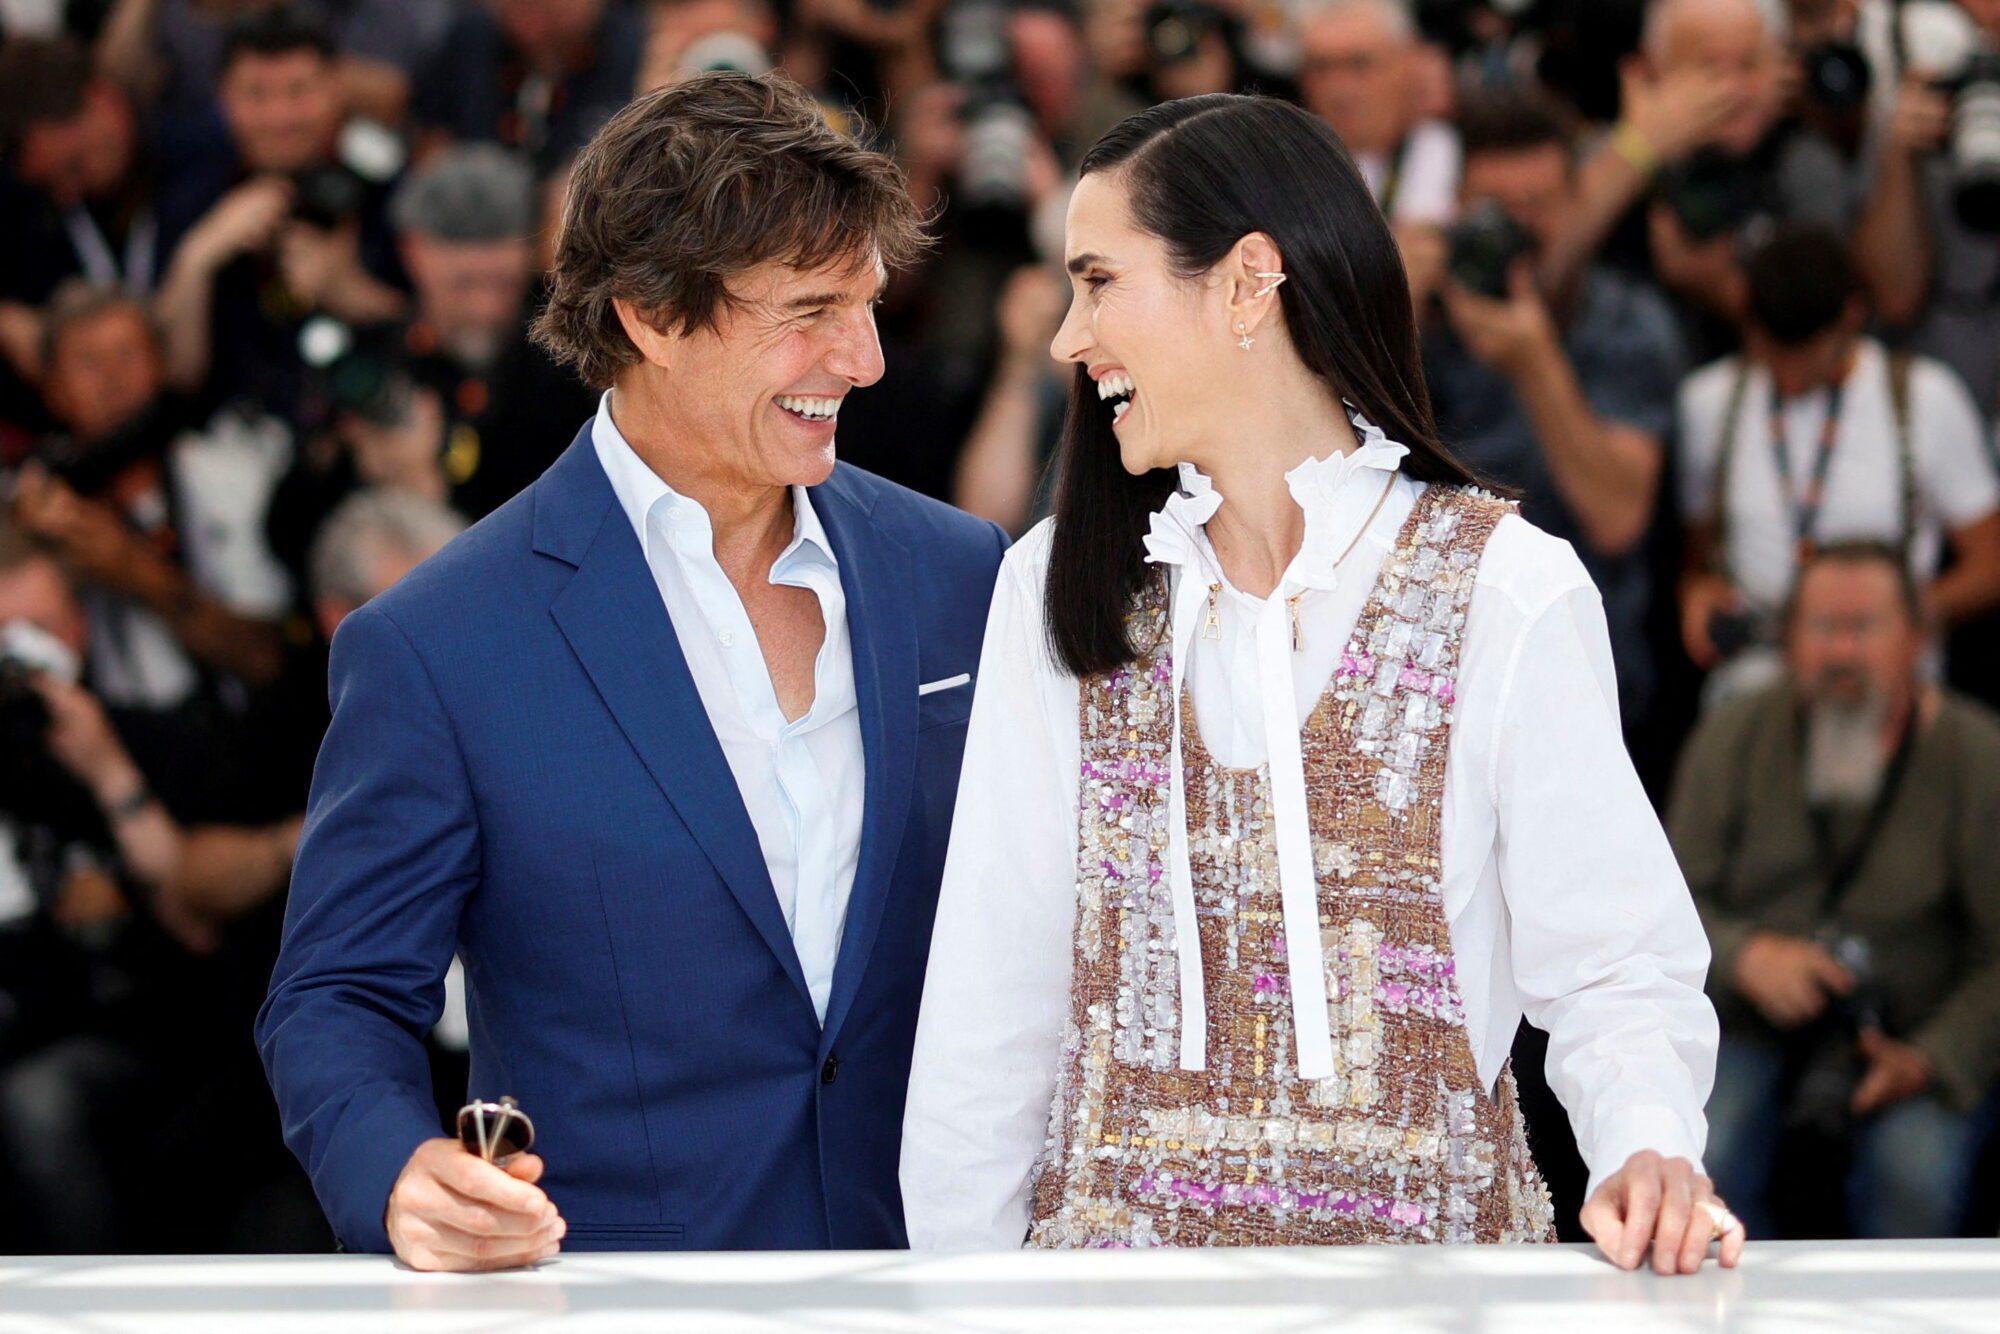 The 75th Cannes Film Festival - Photocall for the film "Top Gun: Maverick" stars Tom Cruise and Jennifer Connelly 